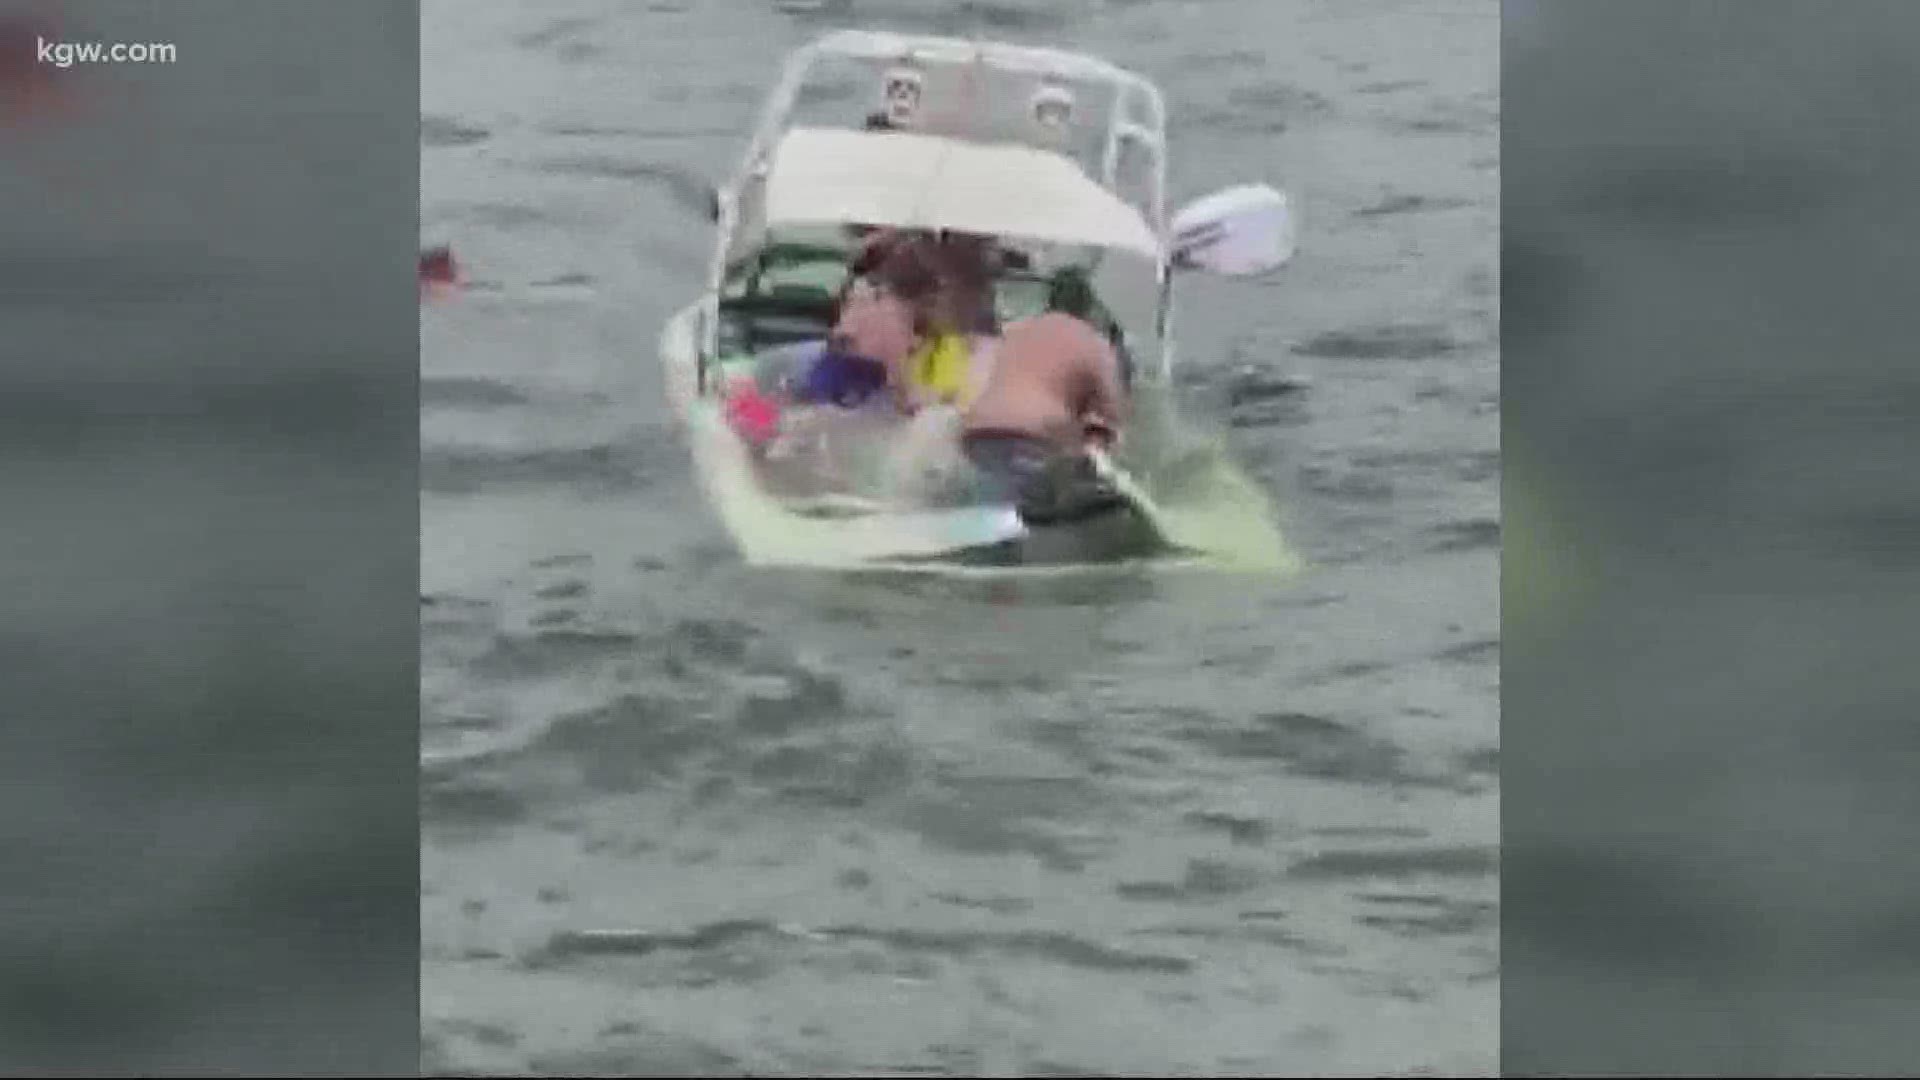 This happened while a “Trump boat parade" was taking place. No one was hurt.